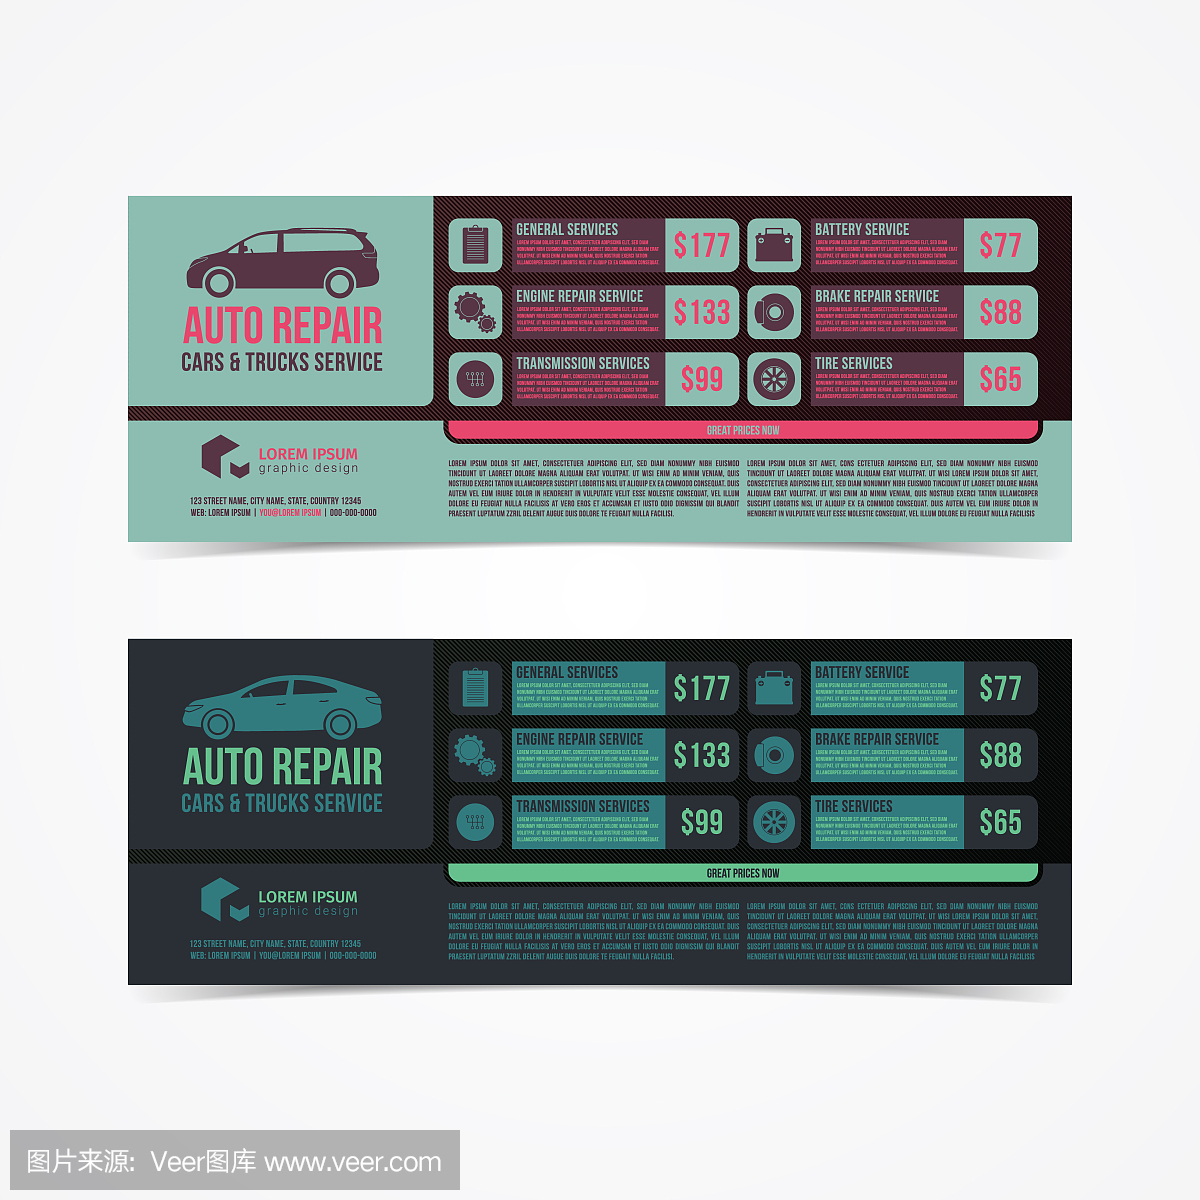 Design of banners. Set of Auto Repair Cars &